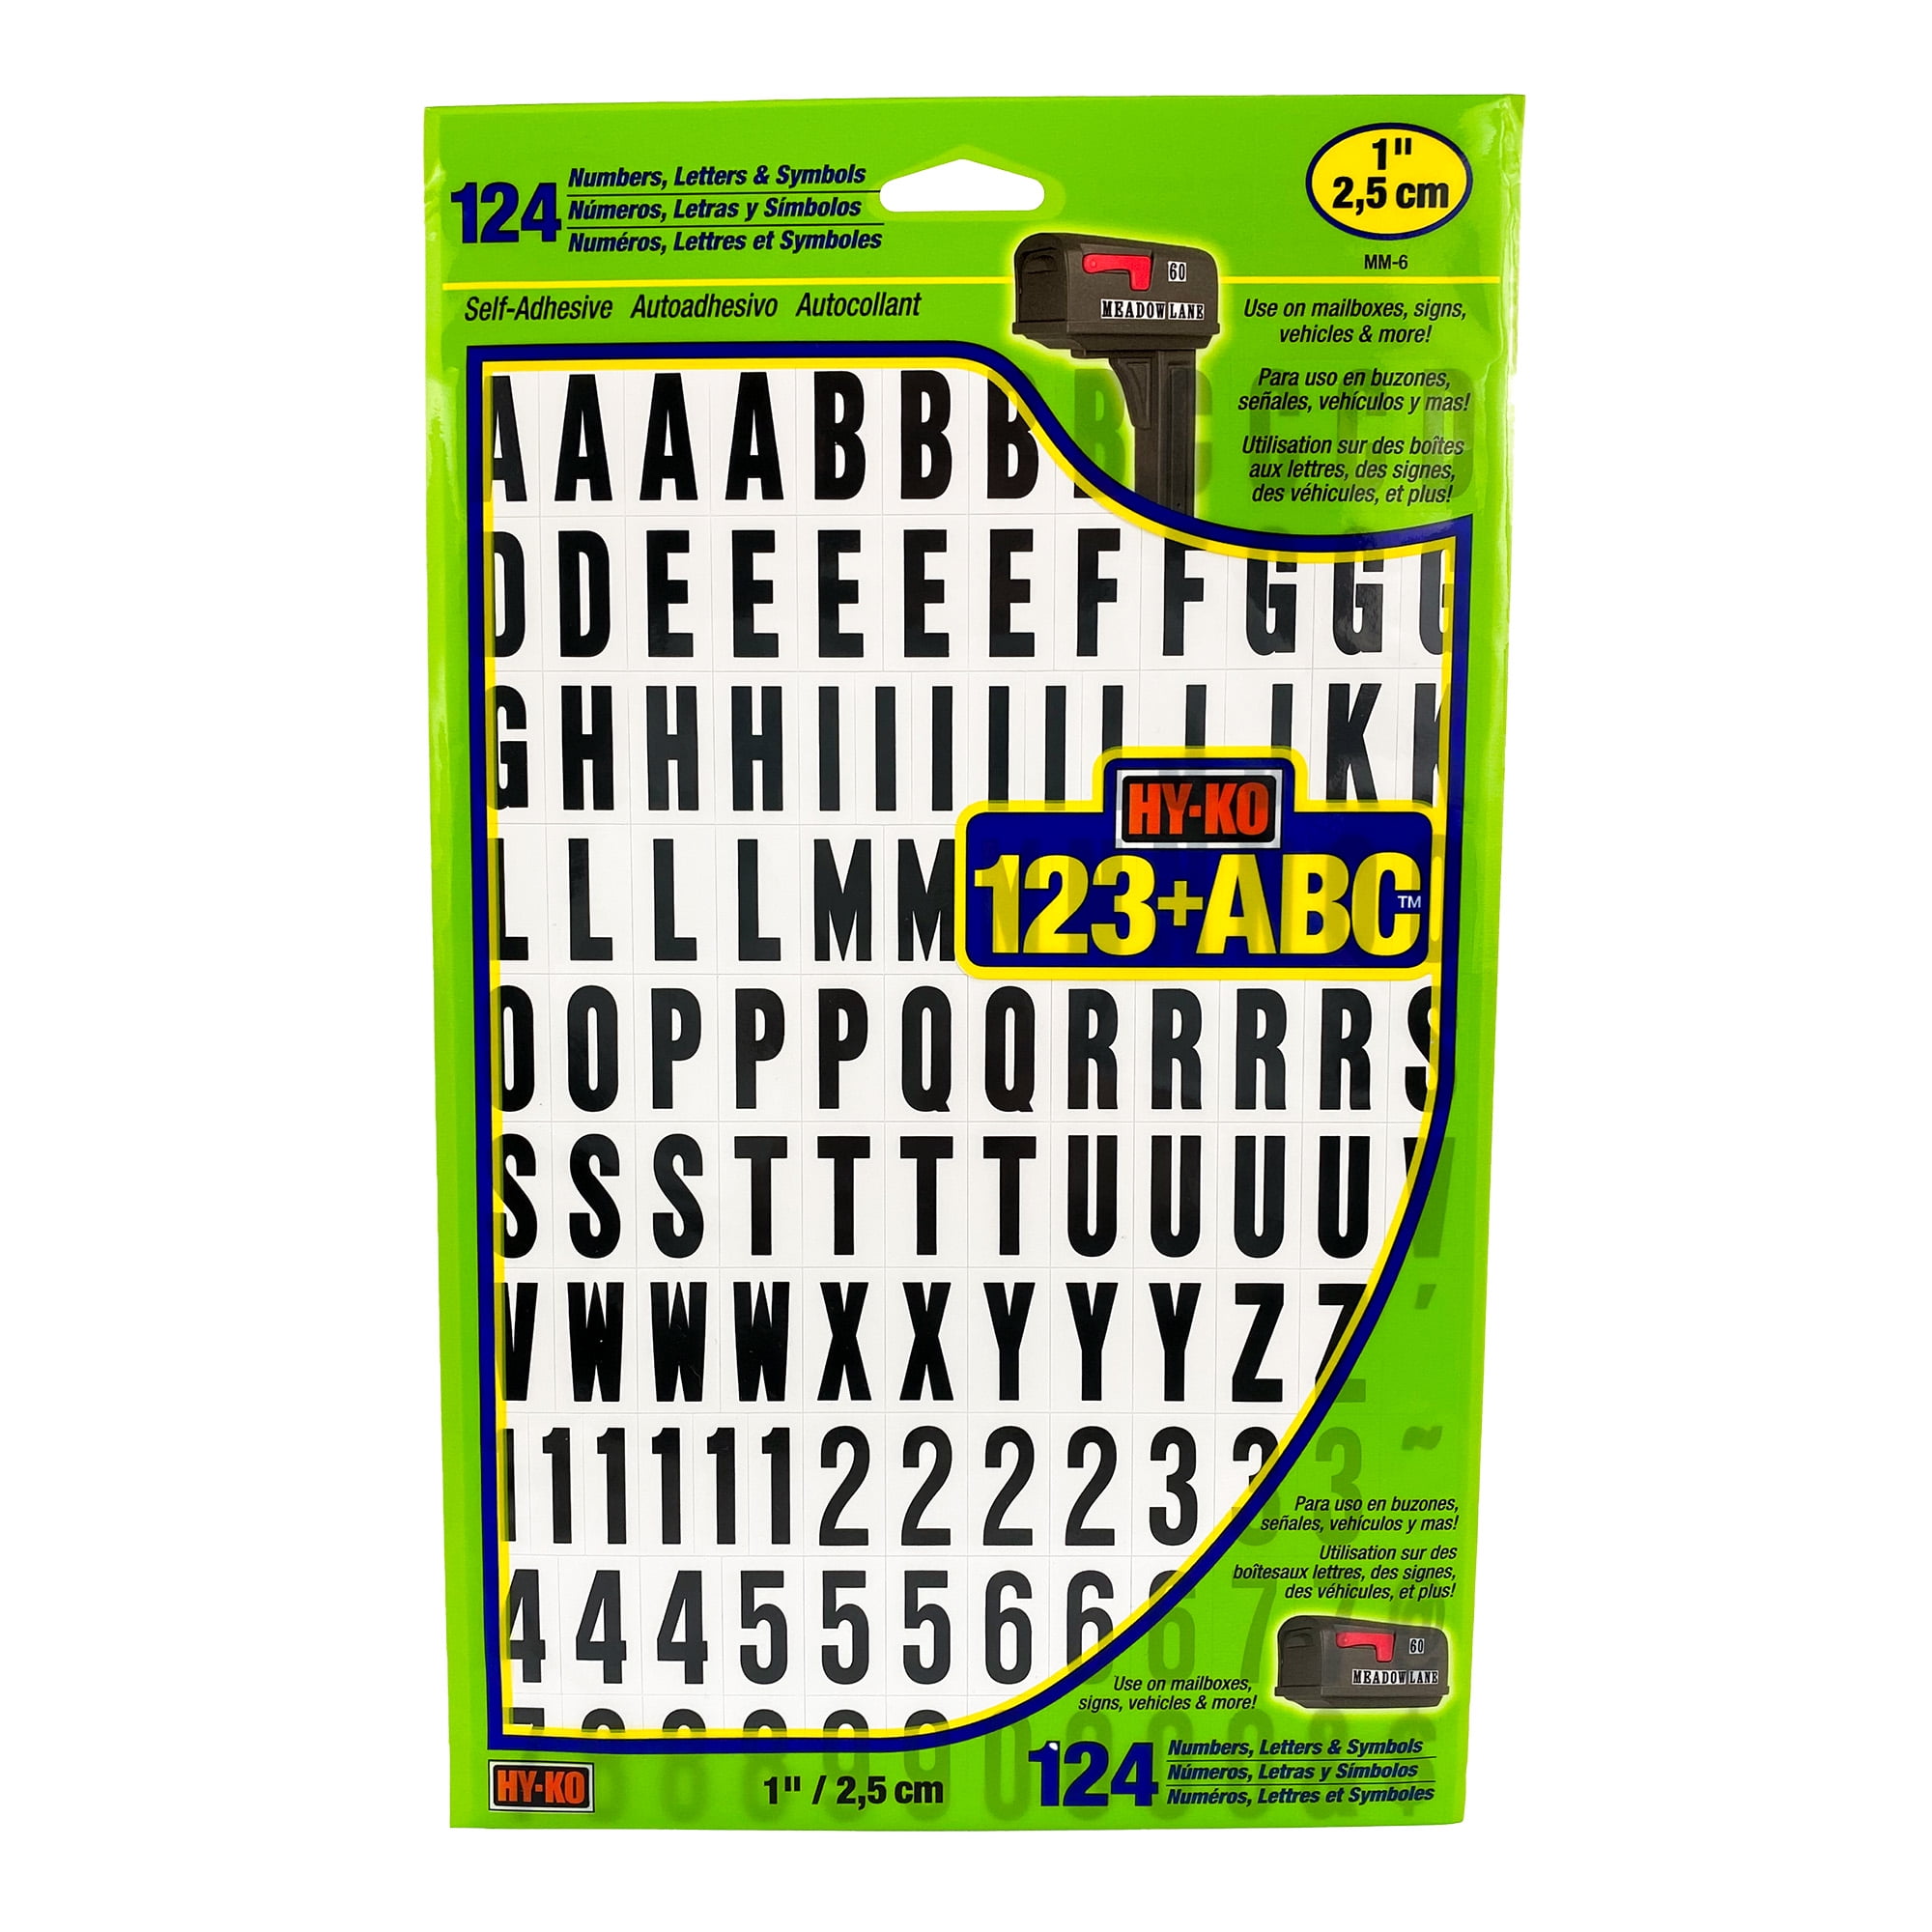 130 Alphabet Label Stickers A To Z Waterproof Black Letters White 0.62" x 0.51" 